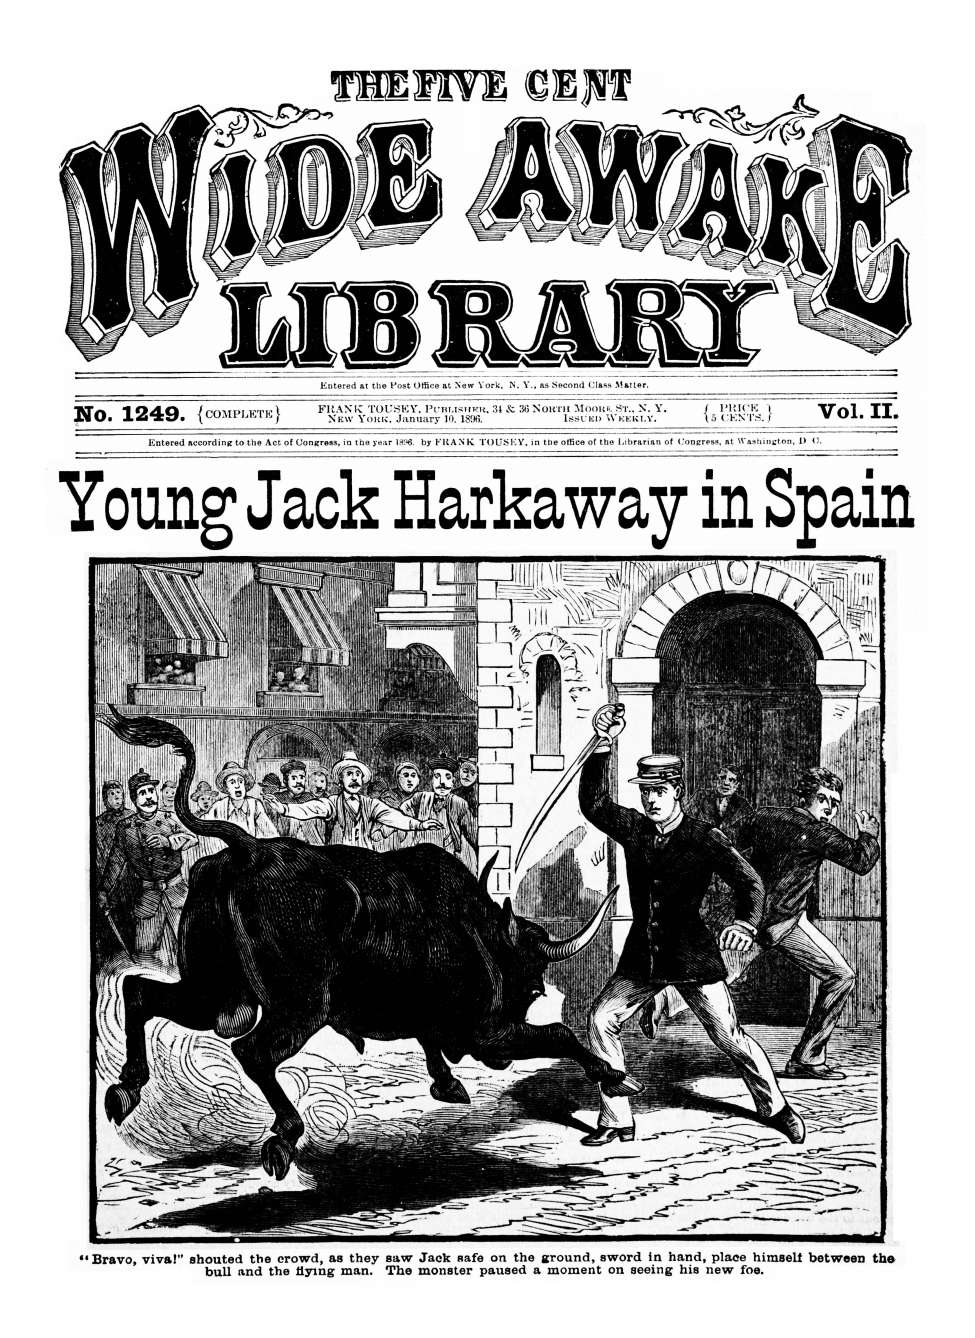 Comic Book Cover For Five Cent Wide Awake Library v2 1249